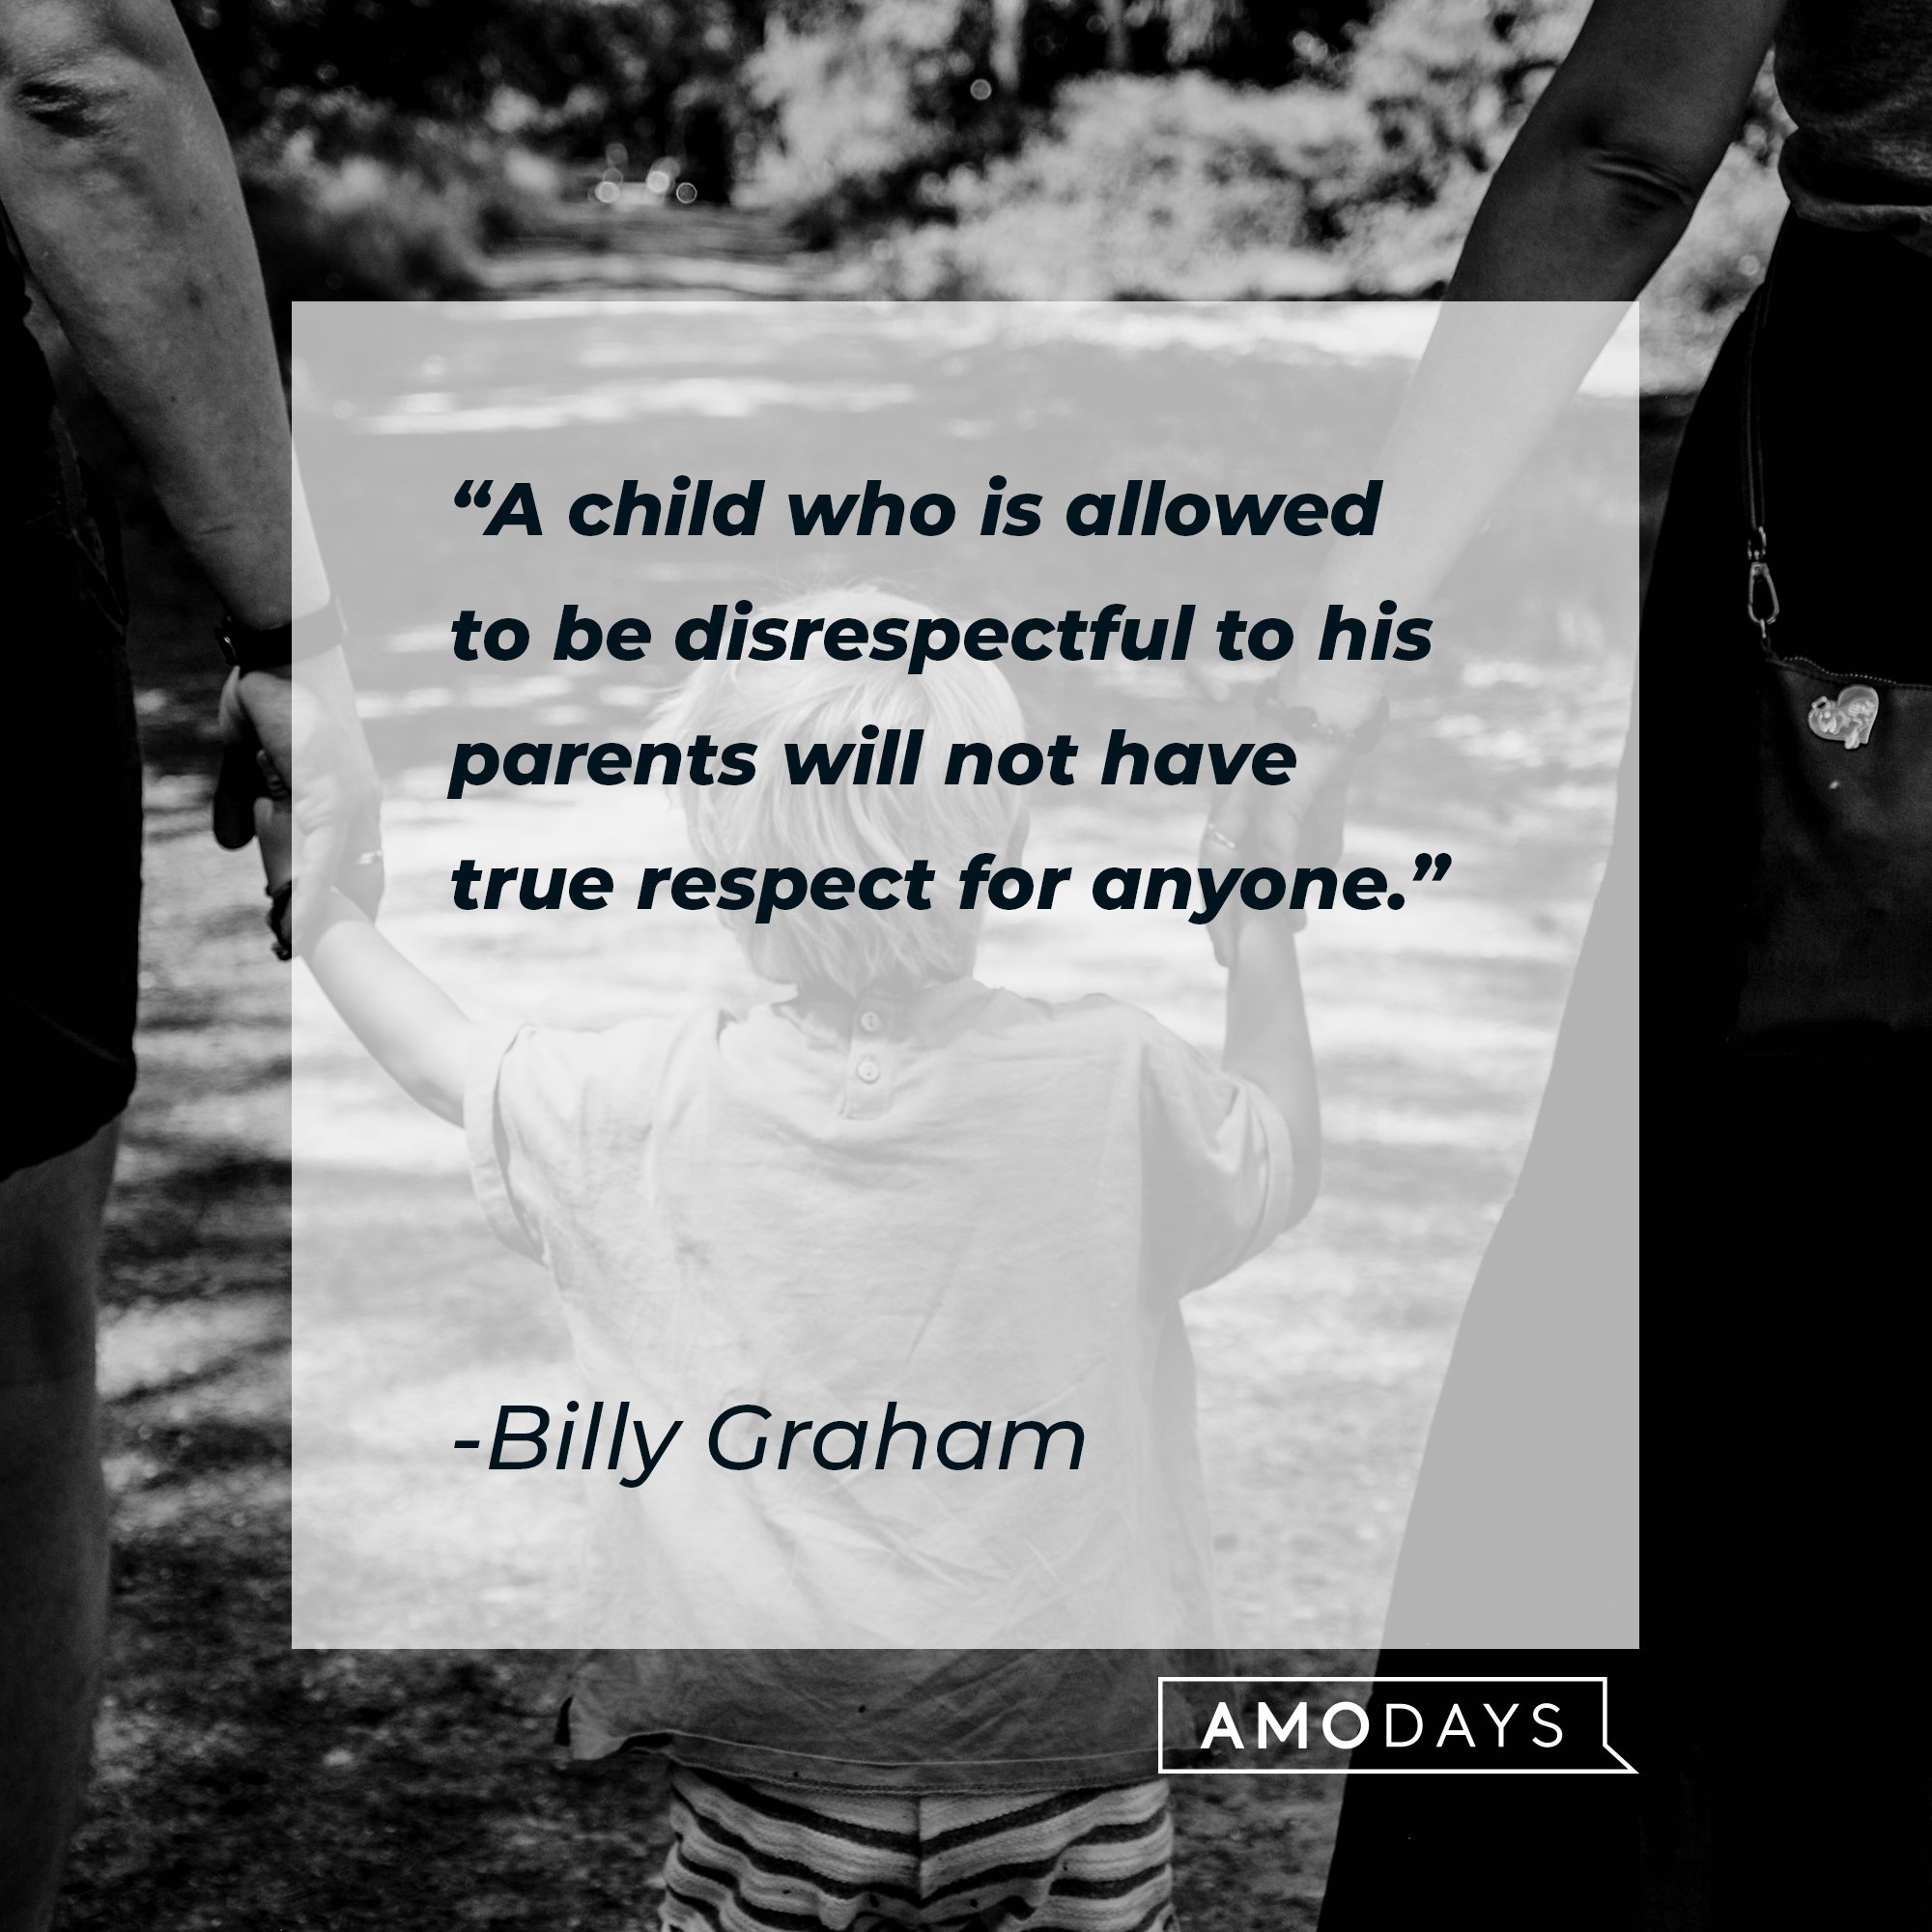 Billy Graham's quote: "A child who is allowed to be disrespectful to his parents will not have true respect for anyone." | Image: AmoDays